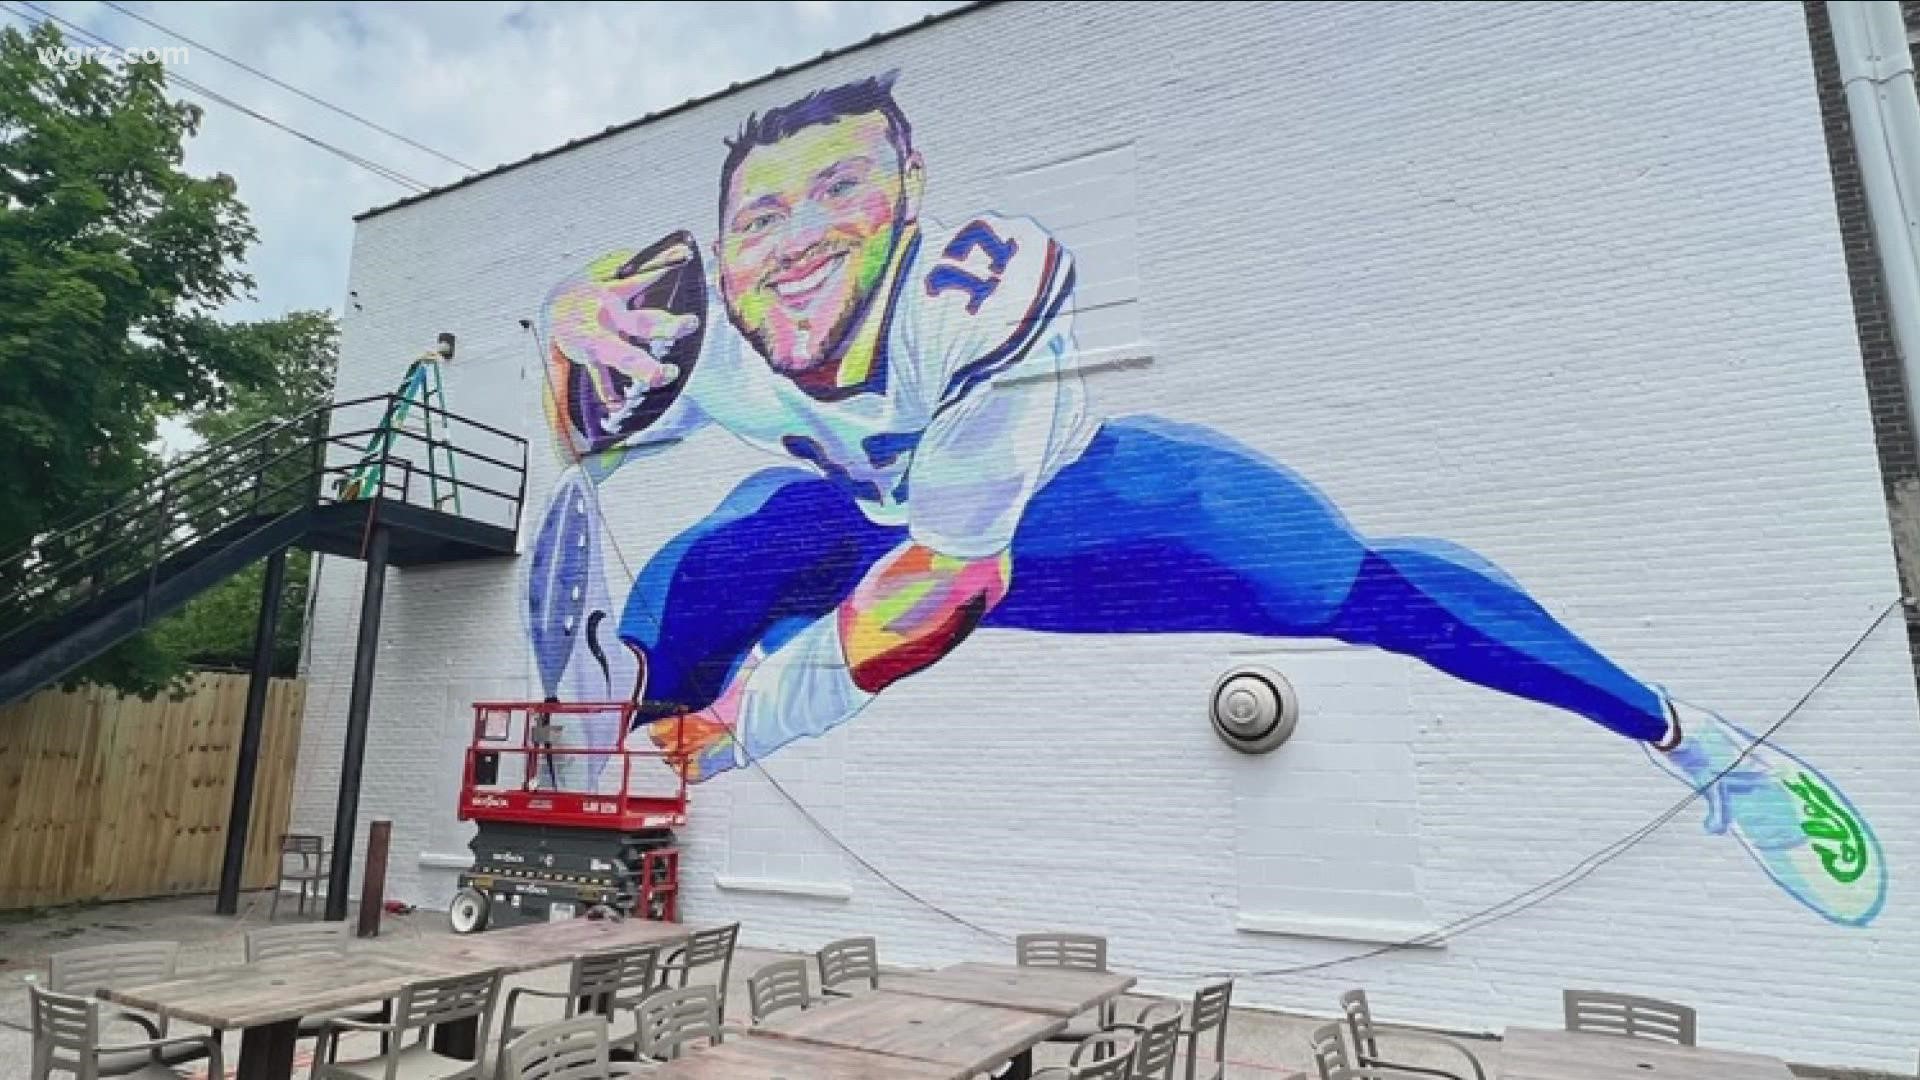 While we wait for the season to kick off, if you enjoy cool art, you can now find this two story Josh Allen mural on the side of Cole's downtown.